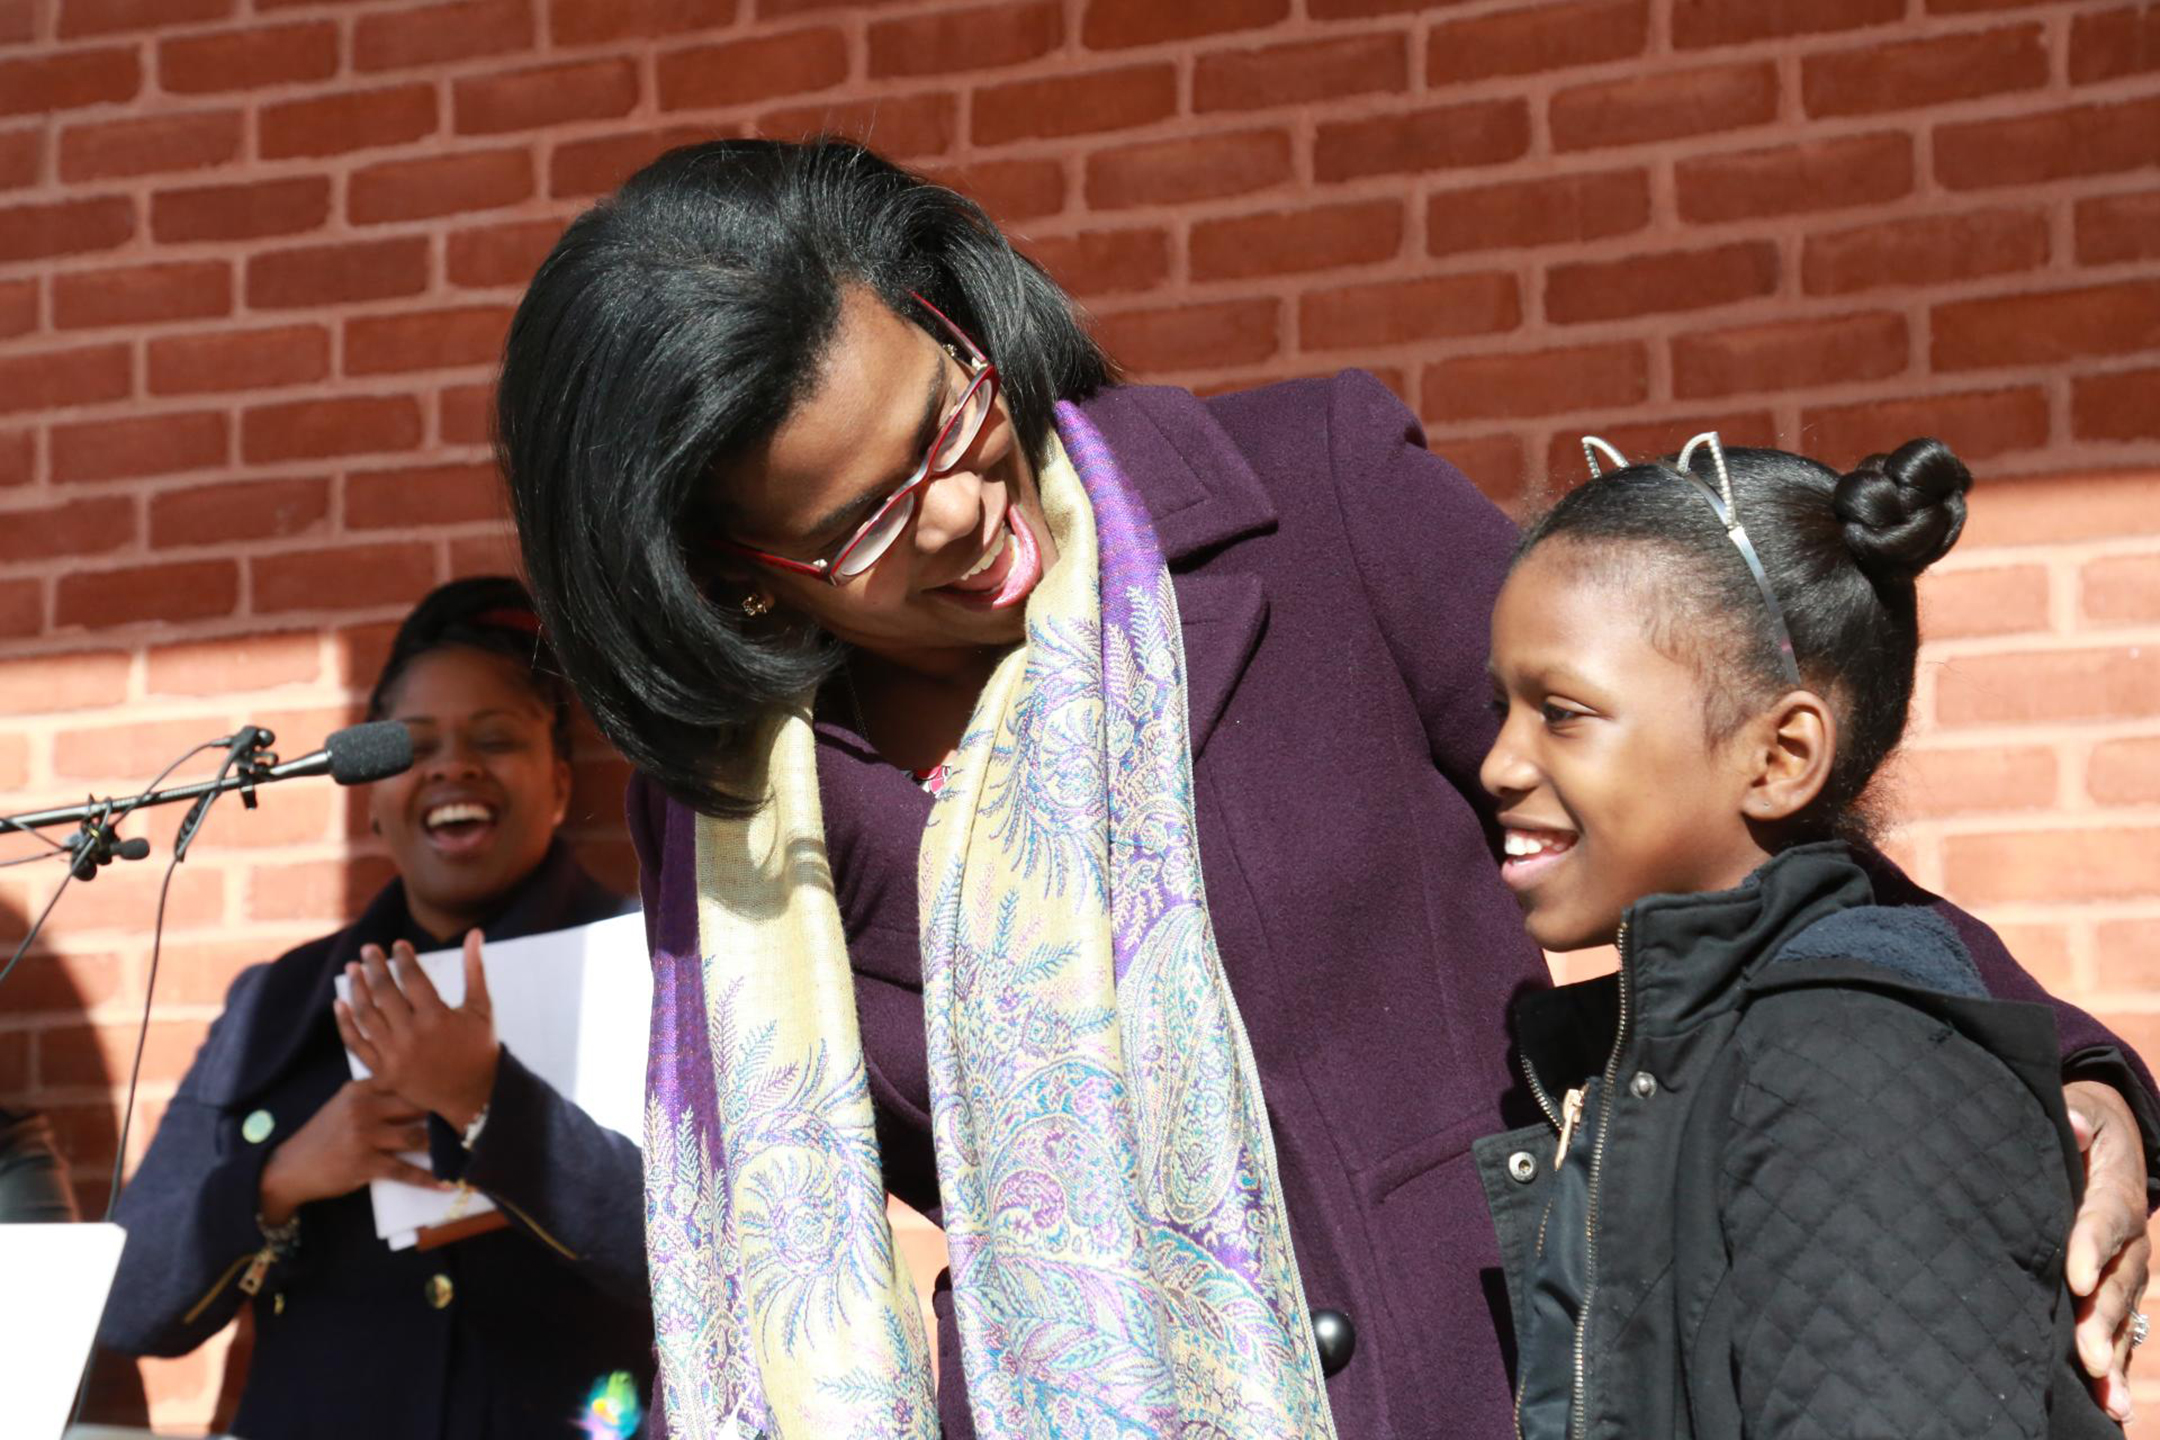 Sonja Santelises, in a winter coat and scarf, smiles as she puts her arm around a smiling student